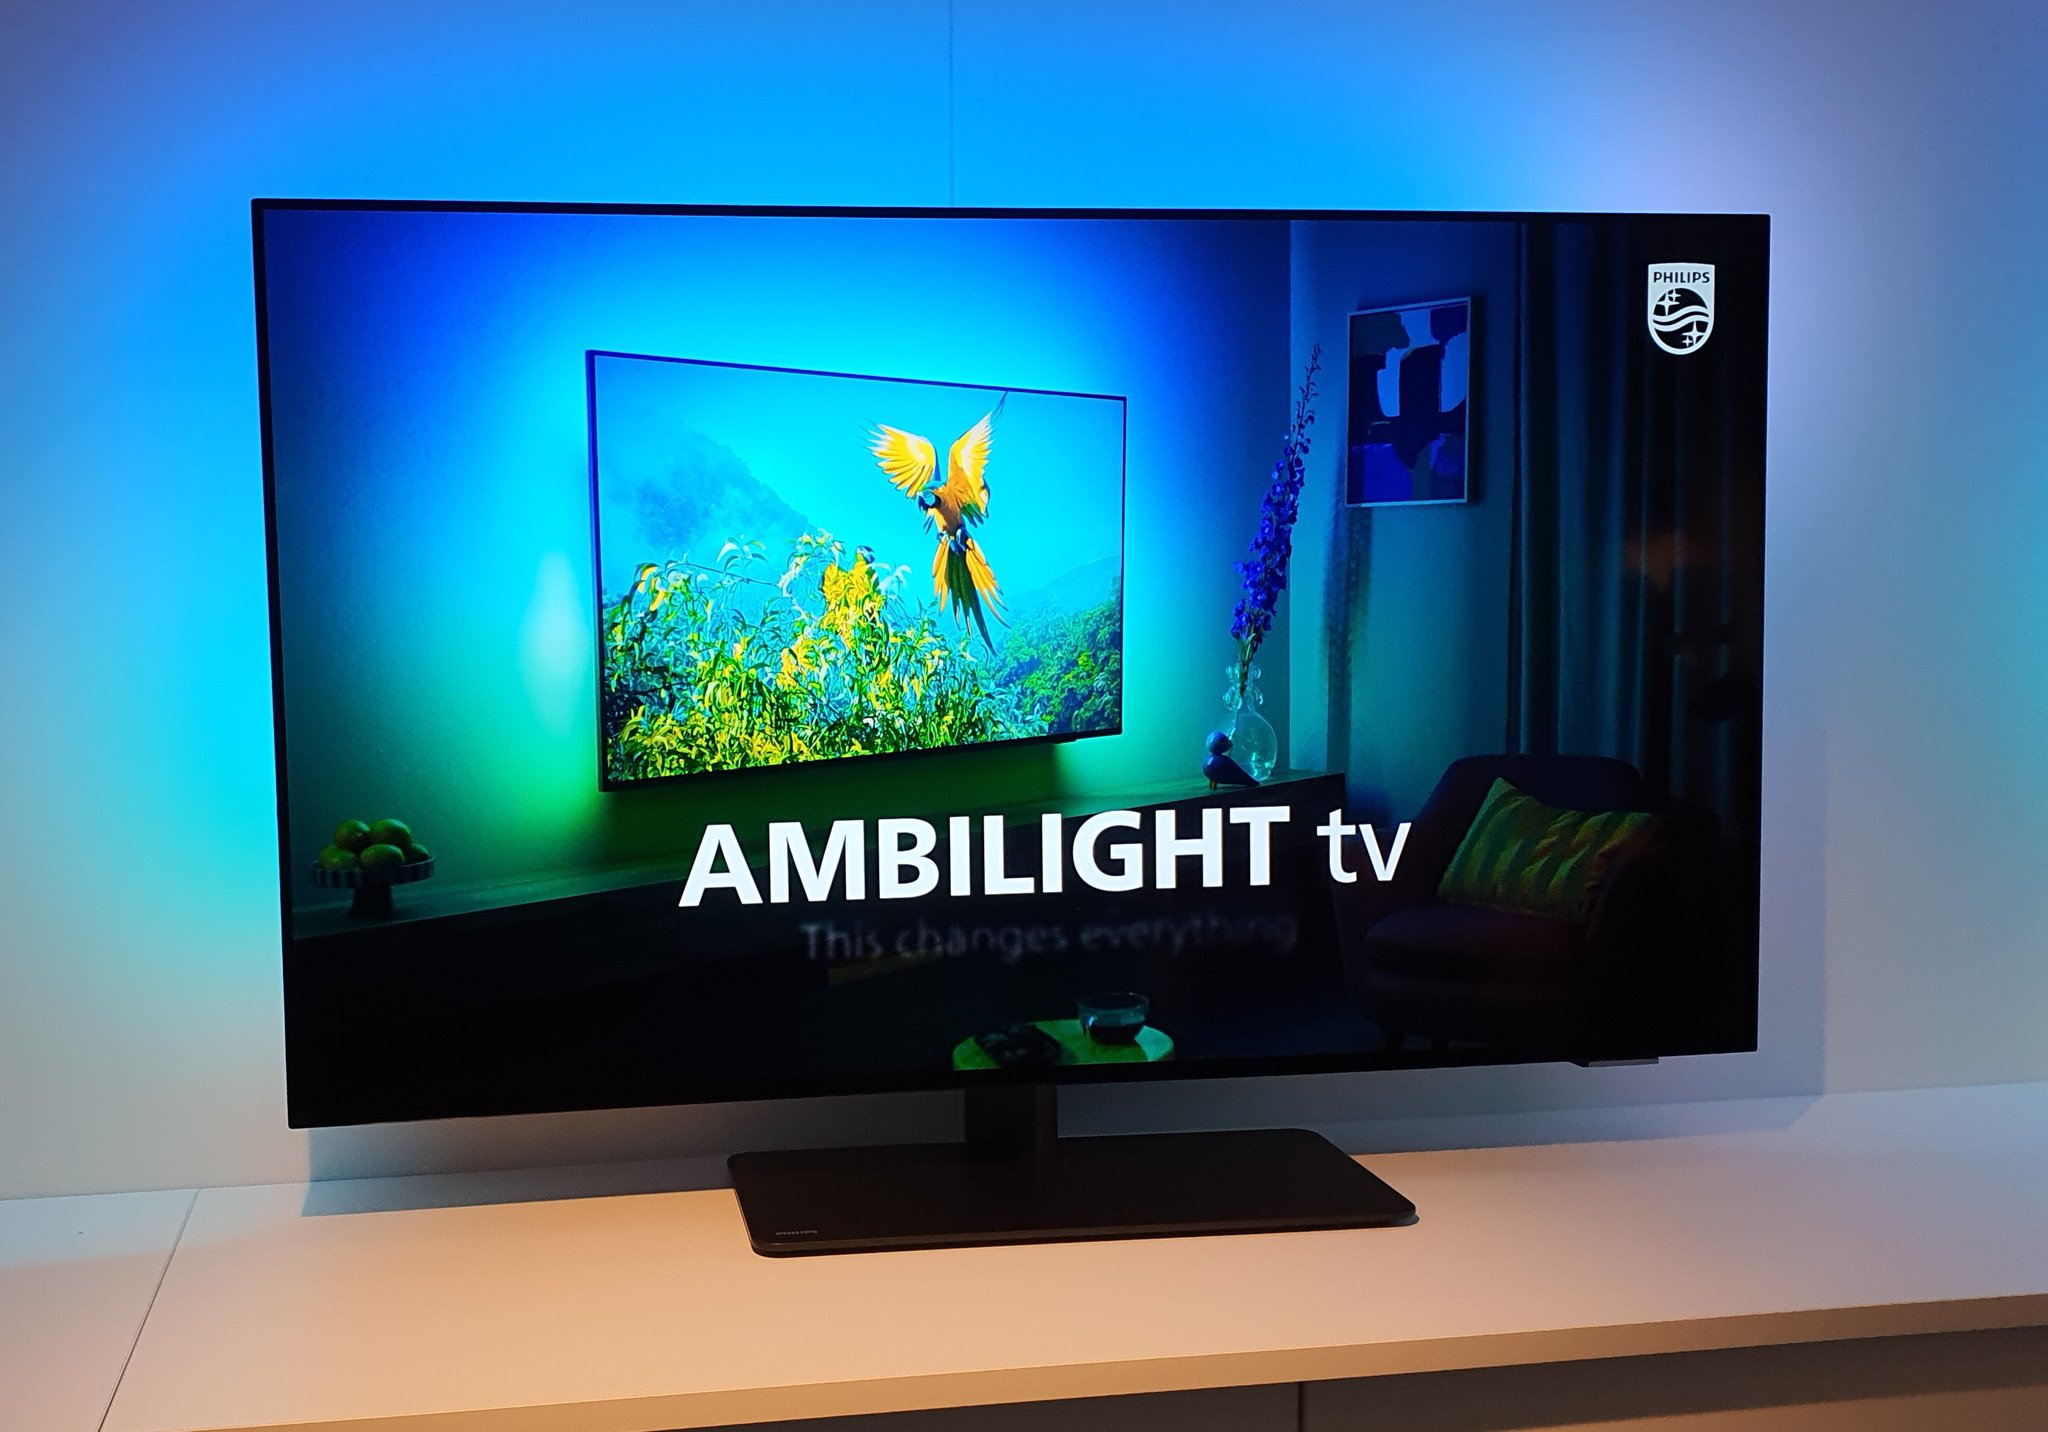 Vincent Teoh on Twitter: "Just clapped eyes on the Philips 42OLED808, the  world's first 42-inch OLED TV with Ambilight. https://t.co/eNPtPKaQtB" /  Twitter